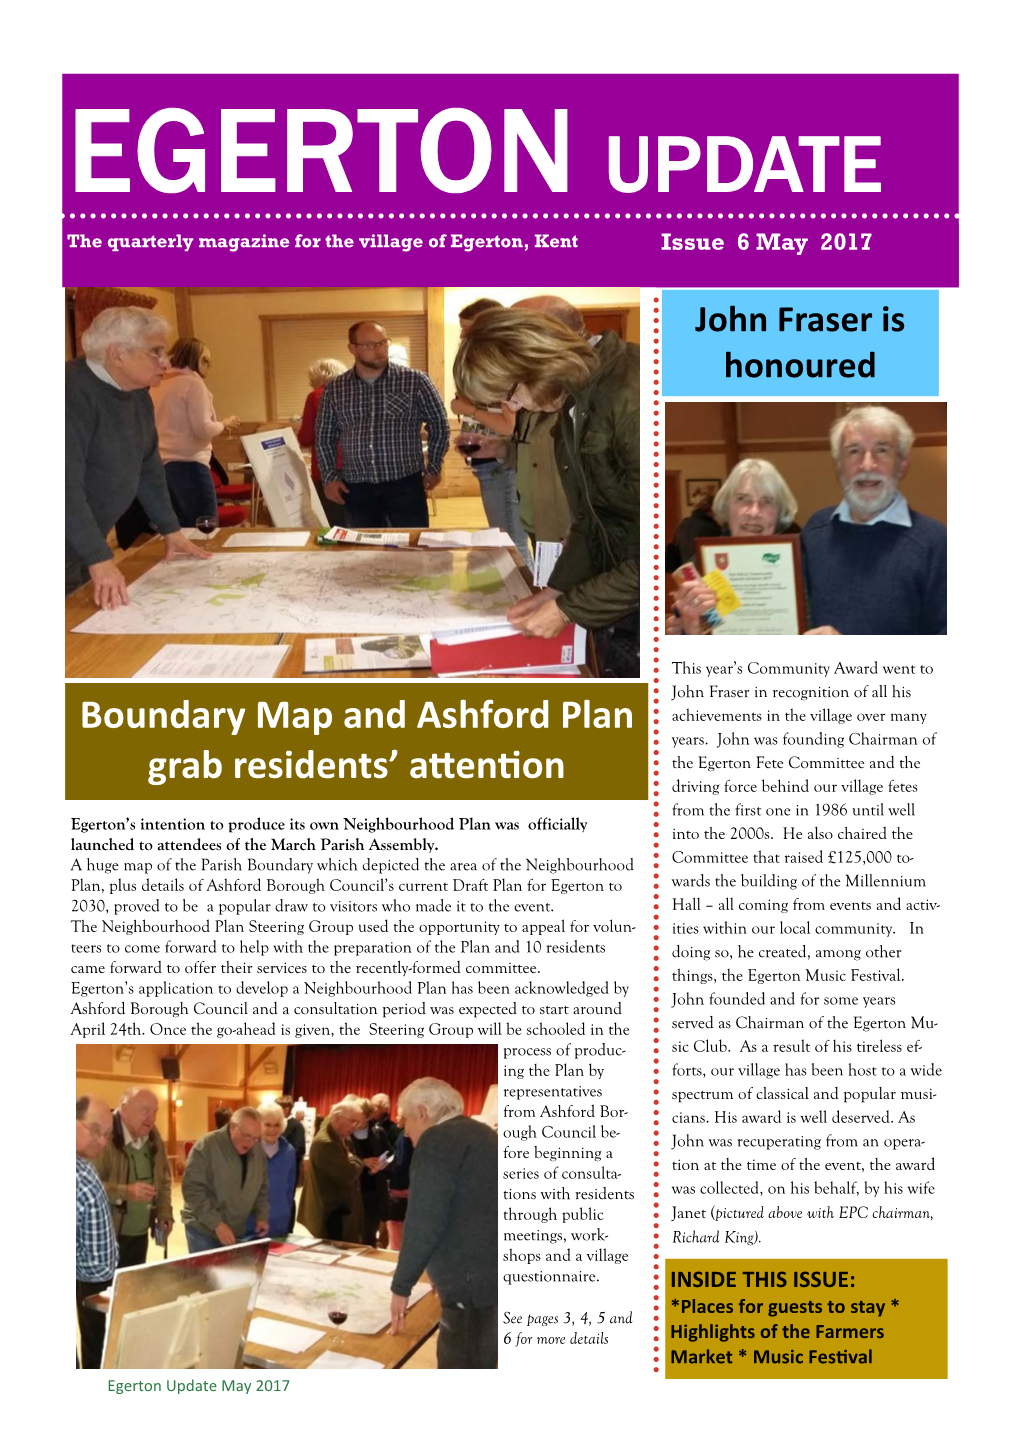 Boundary Map and Ashford Plan Grab Residents' Attention